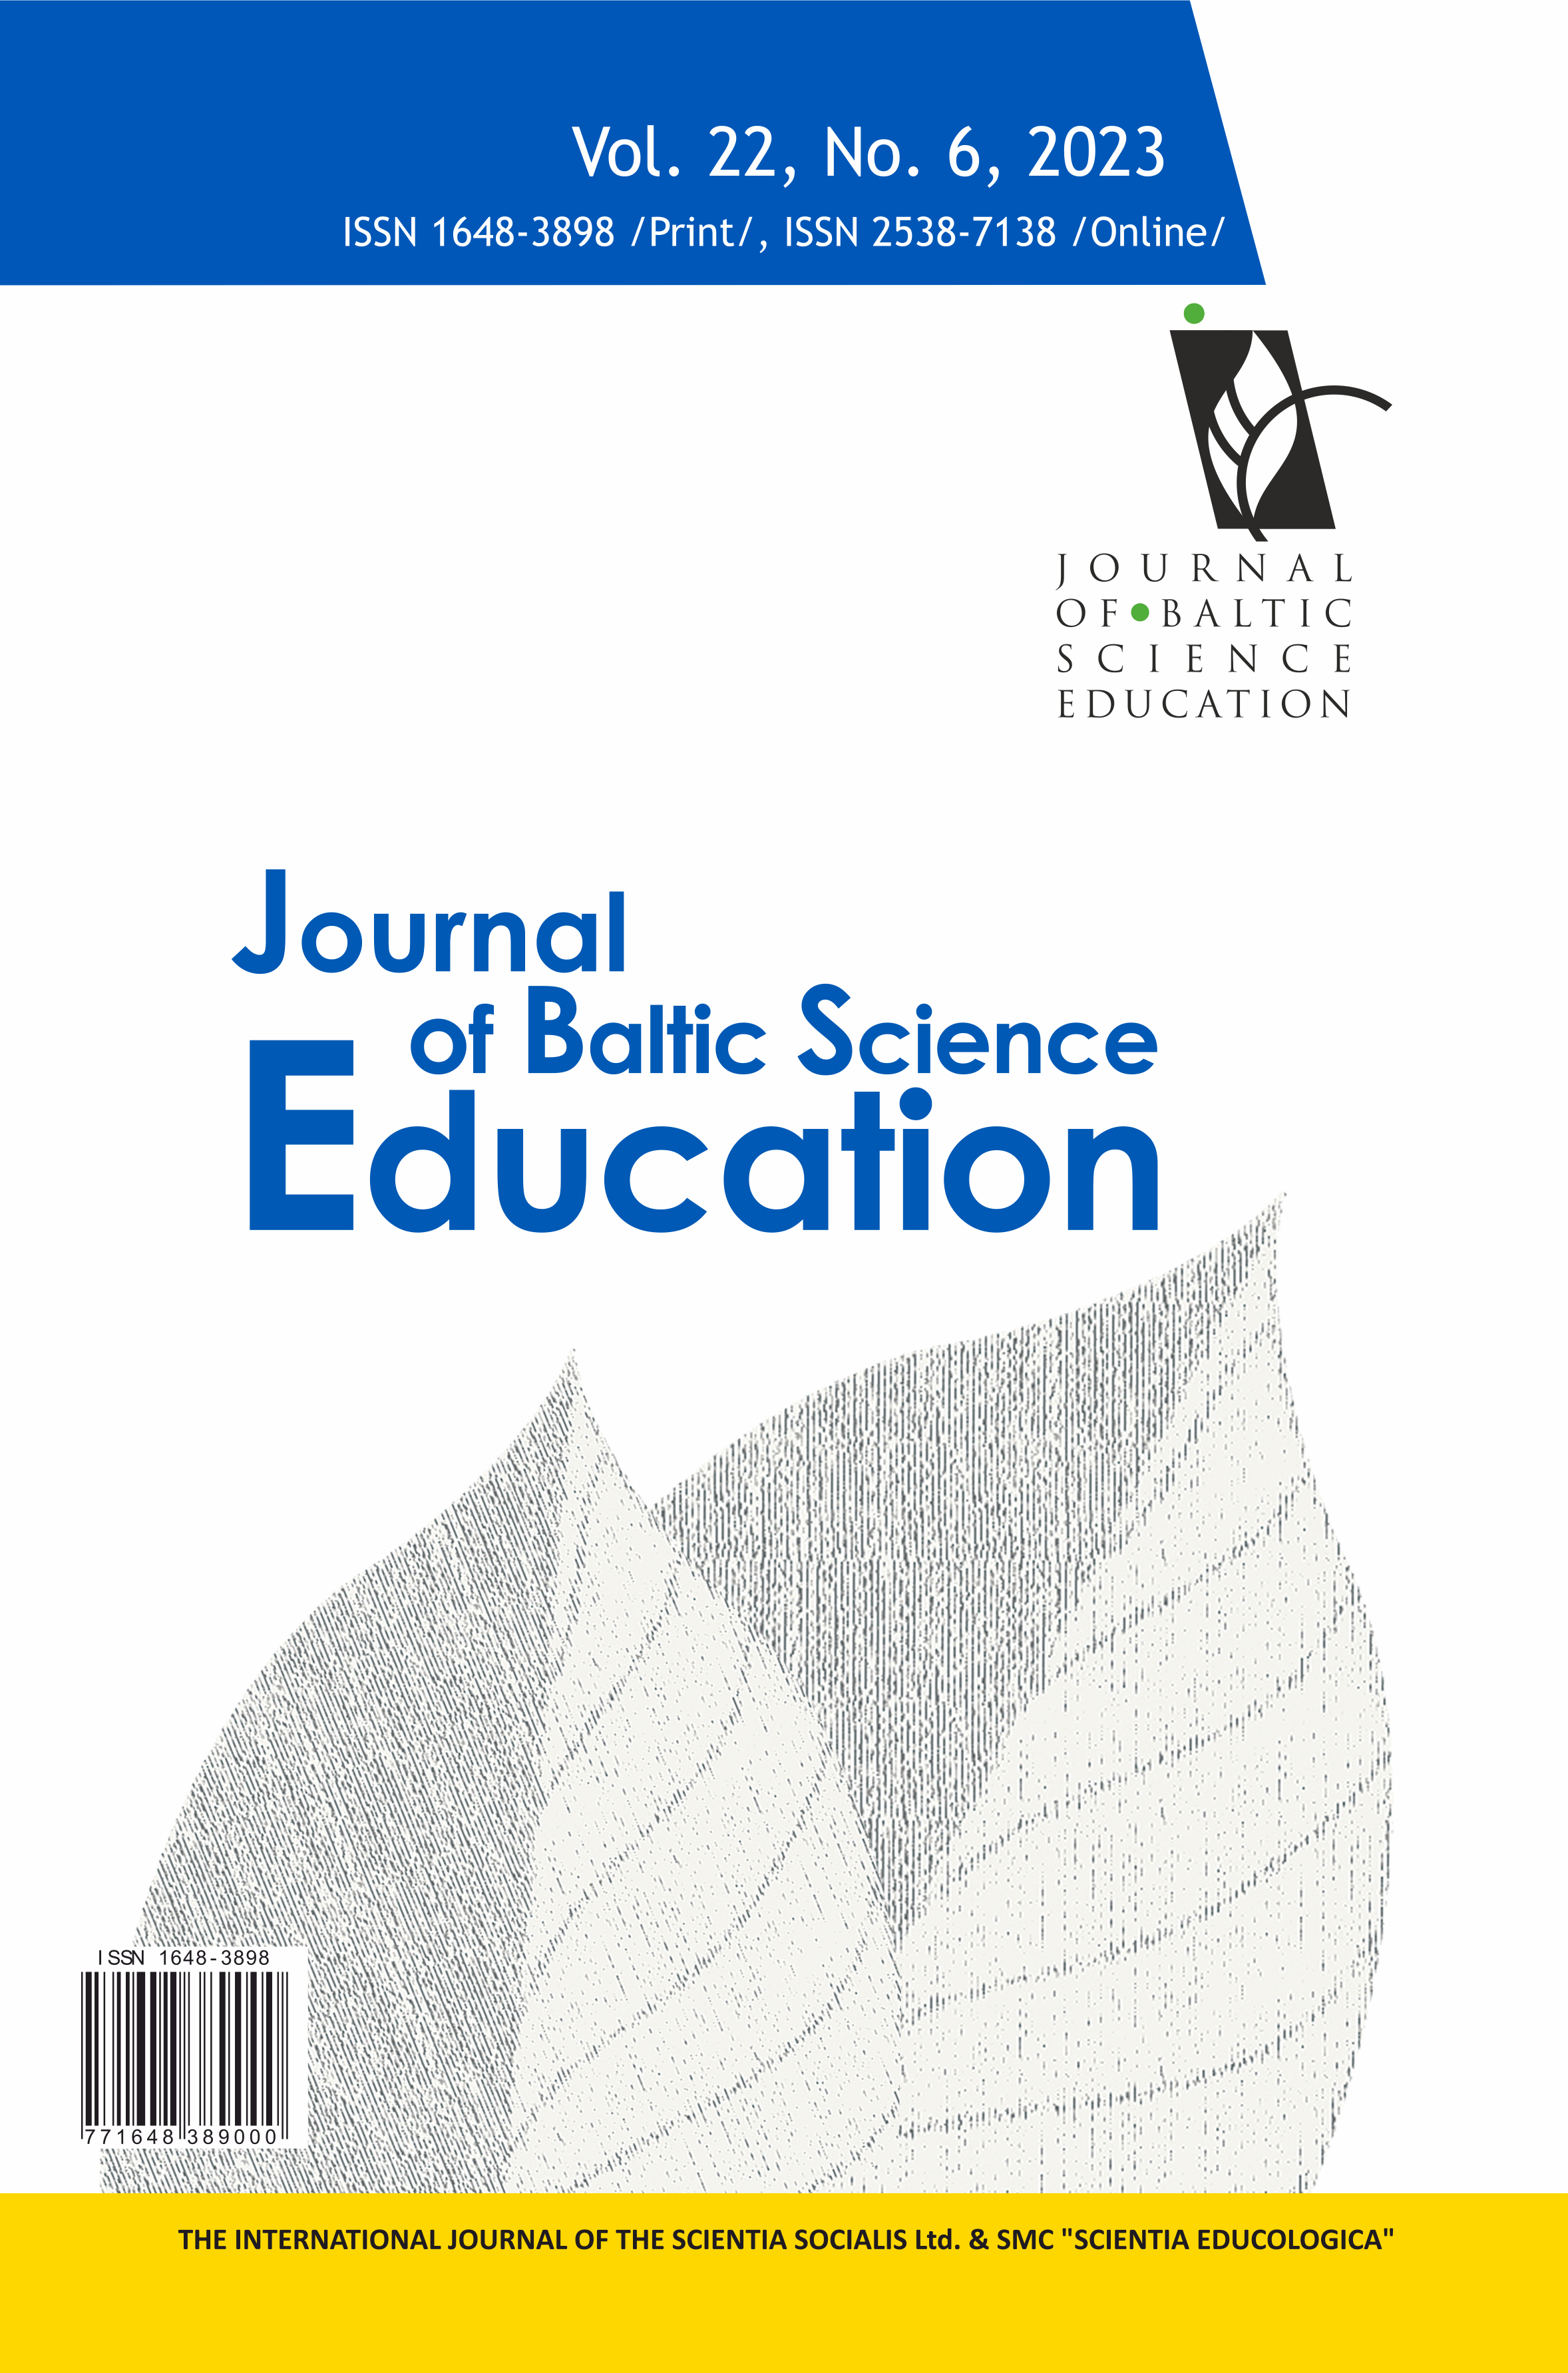 EFFECTS OF MULTIMEDIA APPLICATION ON STUDENTS’ ACADEMIC ACHIEVEMENT IN AGRICULTURAL SCIENCE